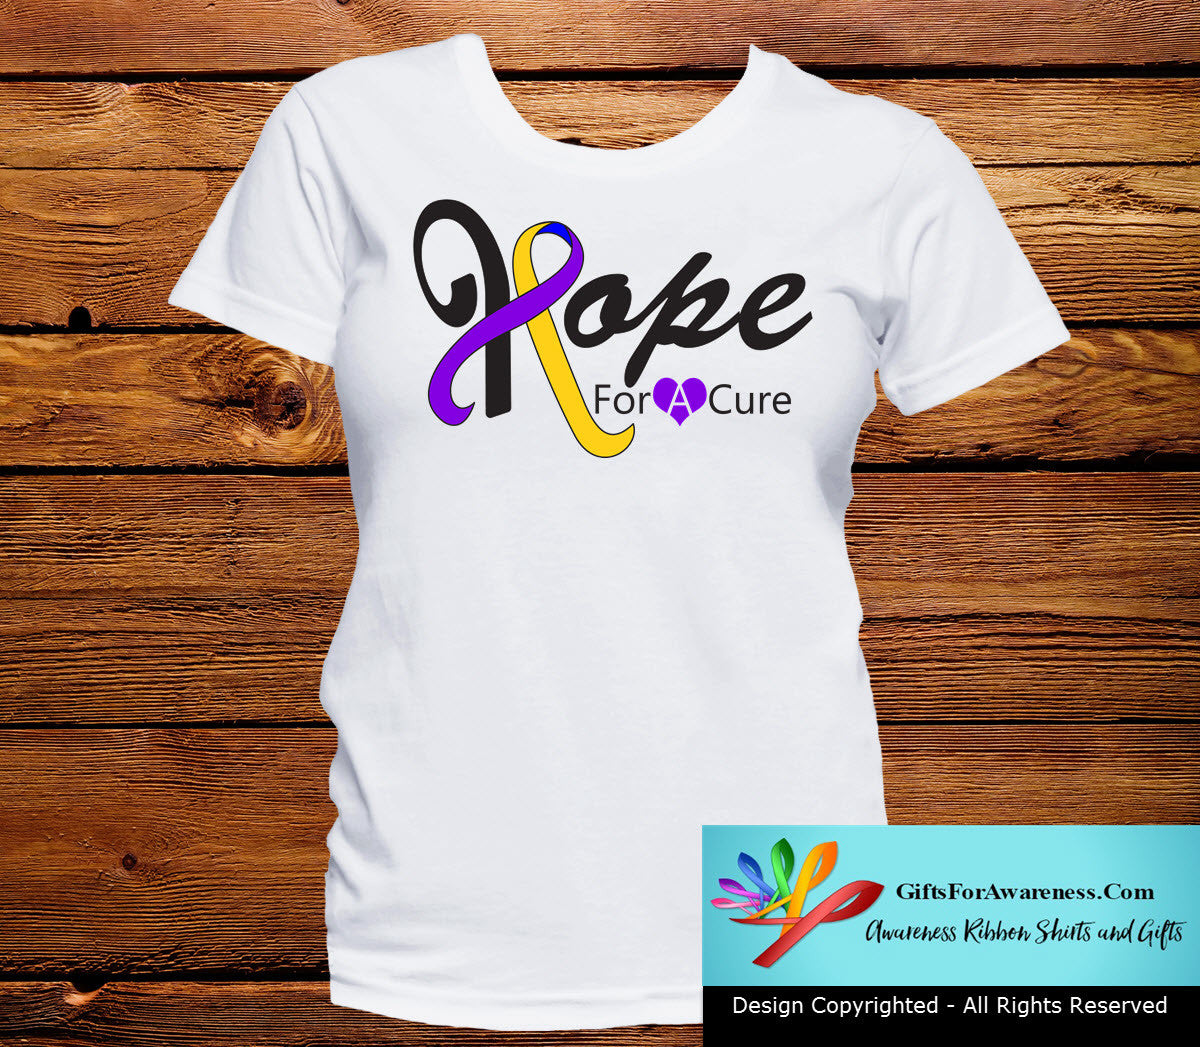 Bladder Cancer Hope For A Cure Shirts - GiftsForAwareness